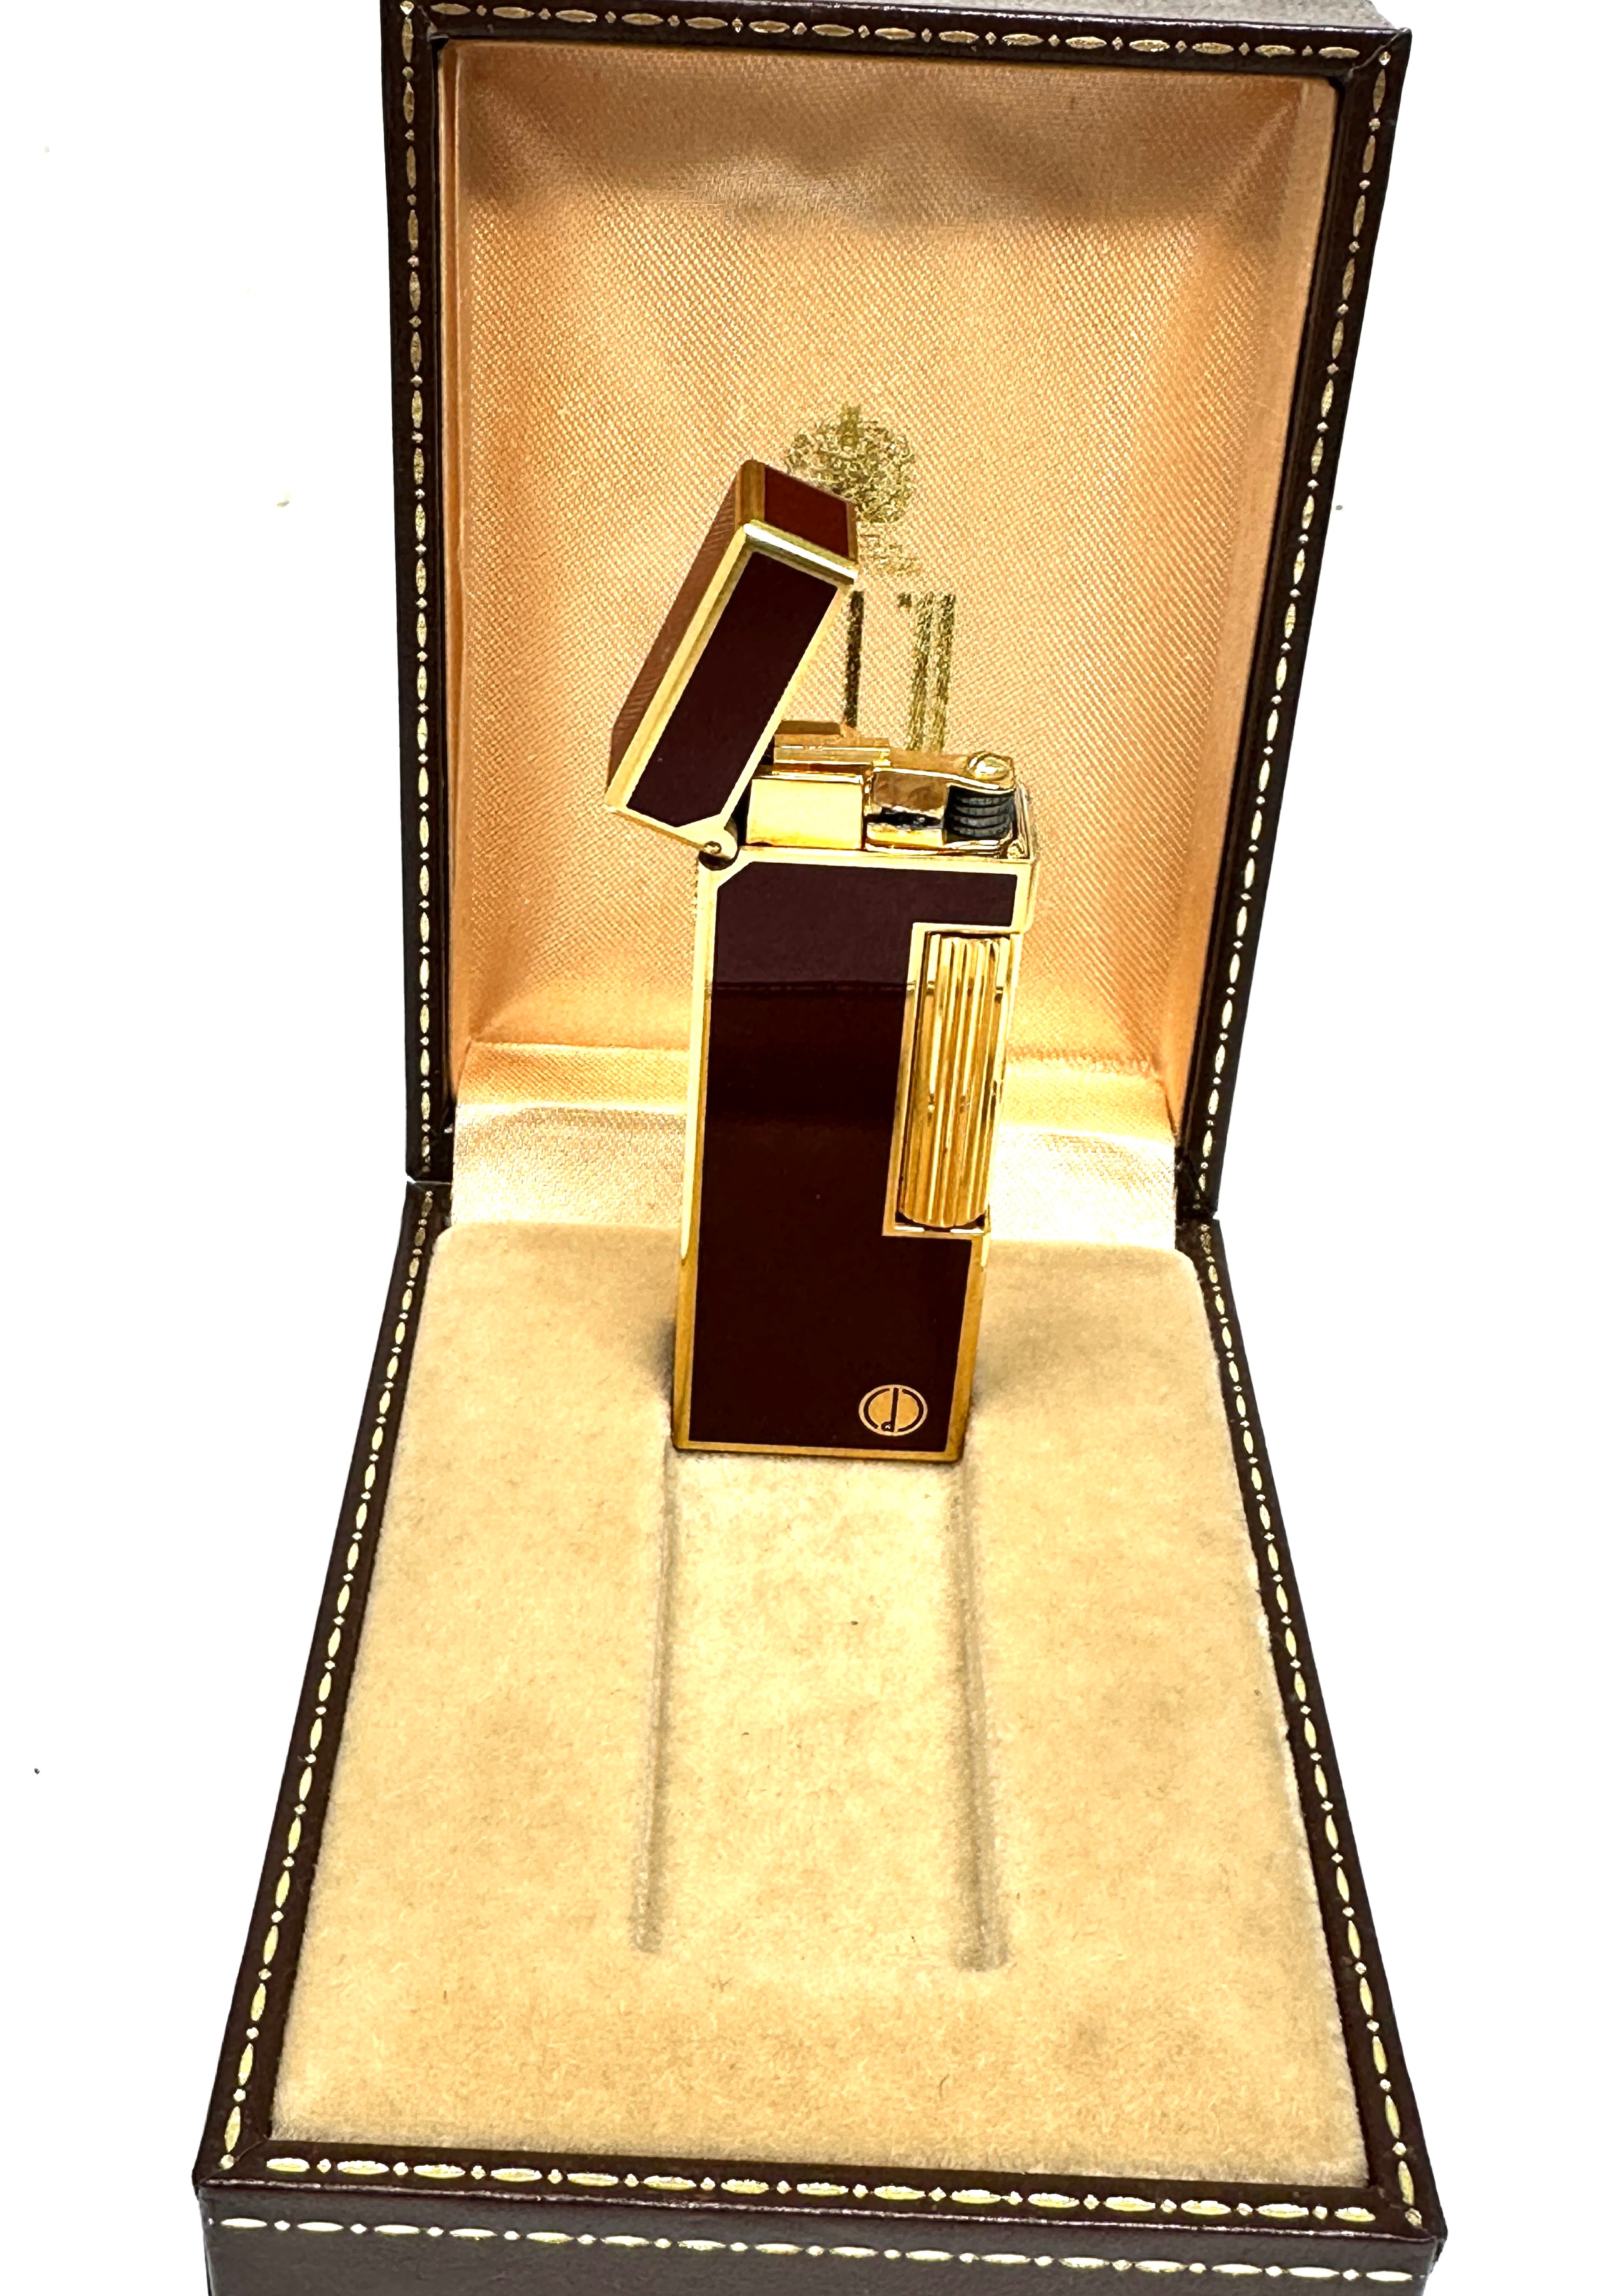 Boxed Dunhill Red Laquer Enamel Rollagas Lighter US.RE 24163